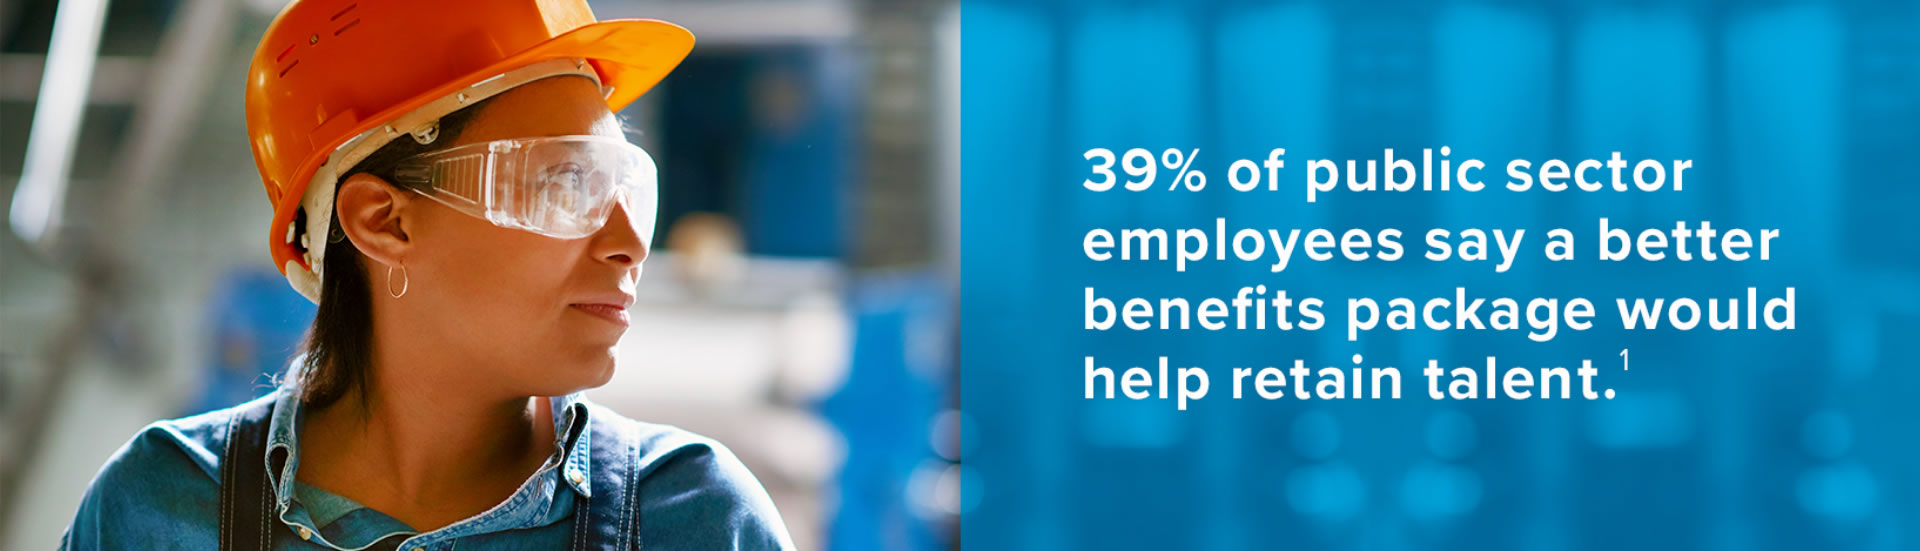 39% of public sector employees say a better benefits package would help retain talent.